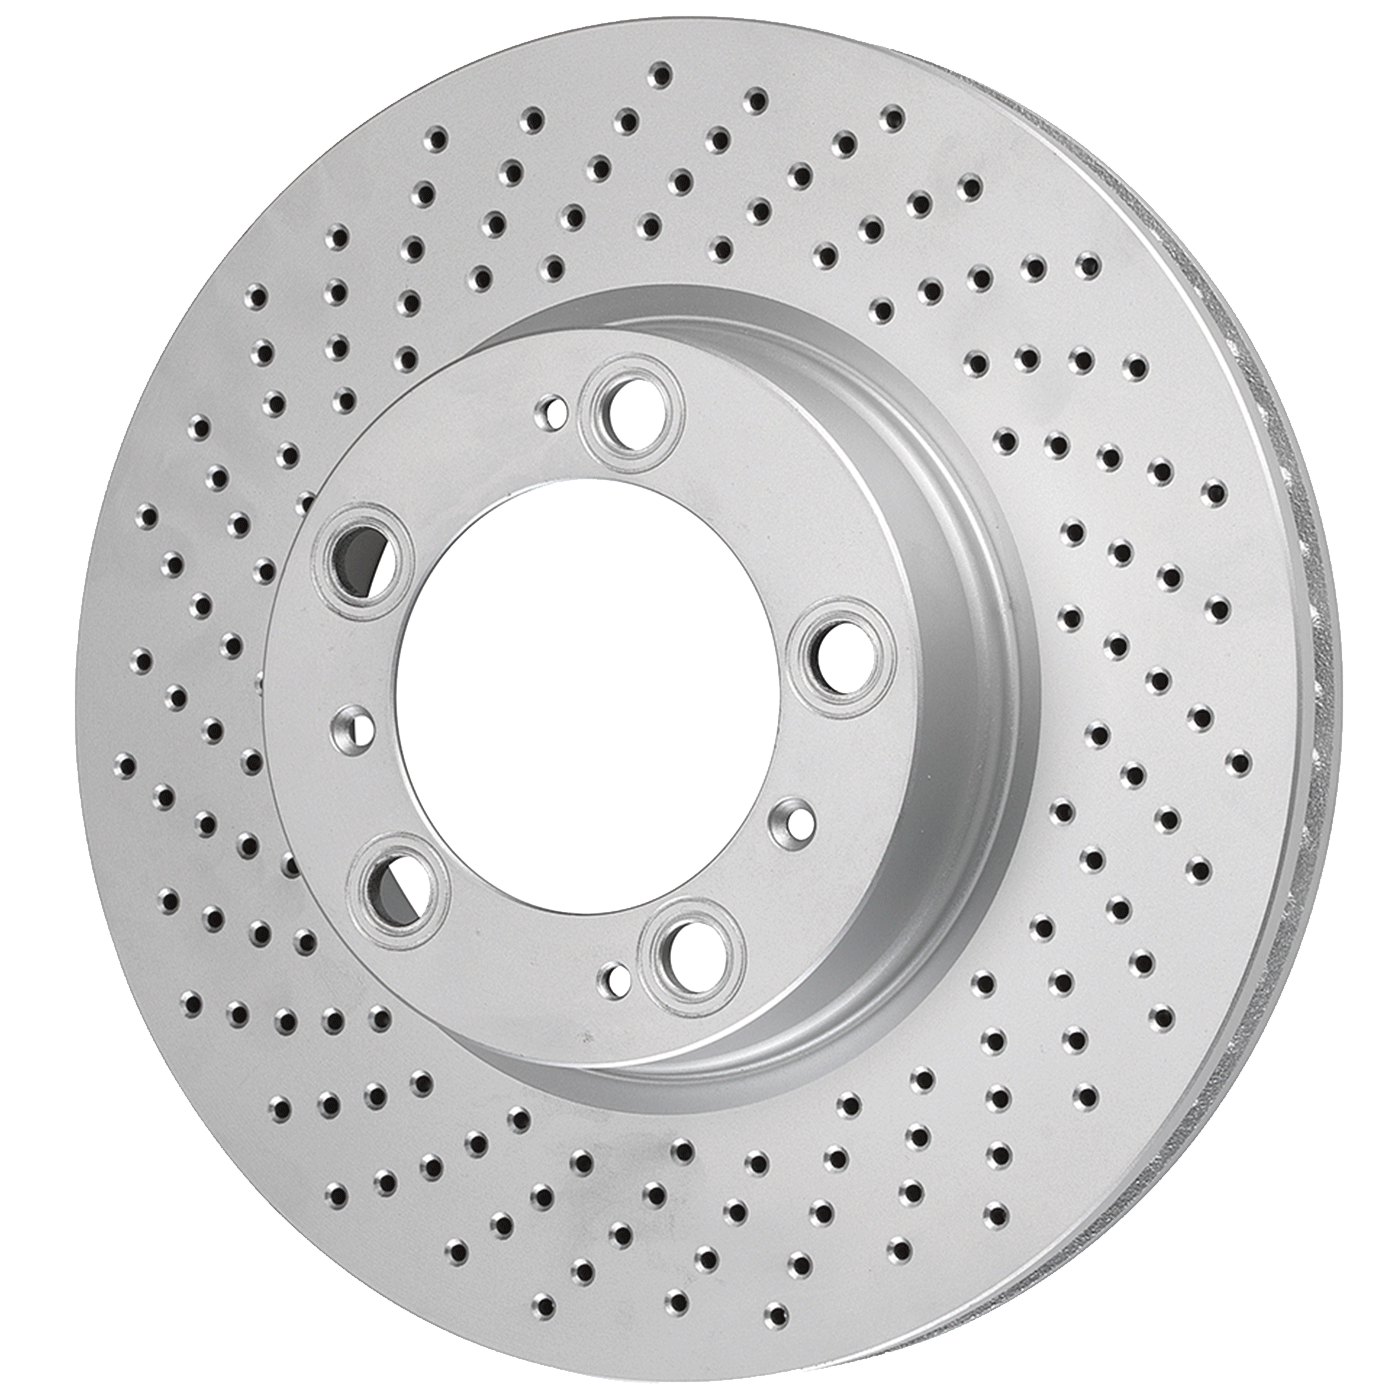 DISCOVERY Brake Disc